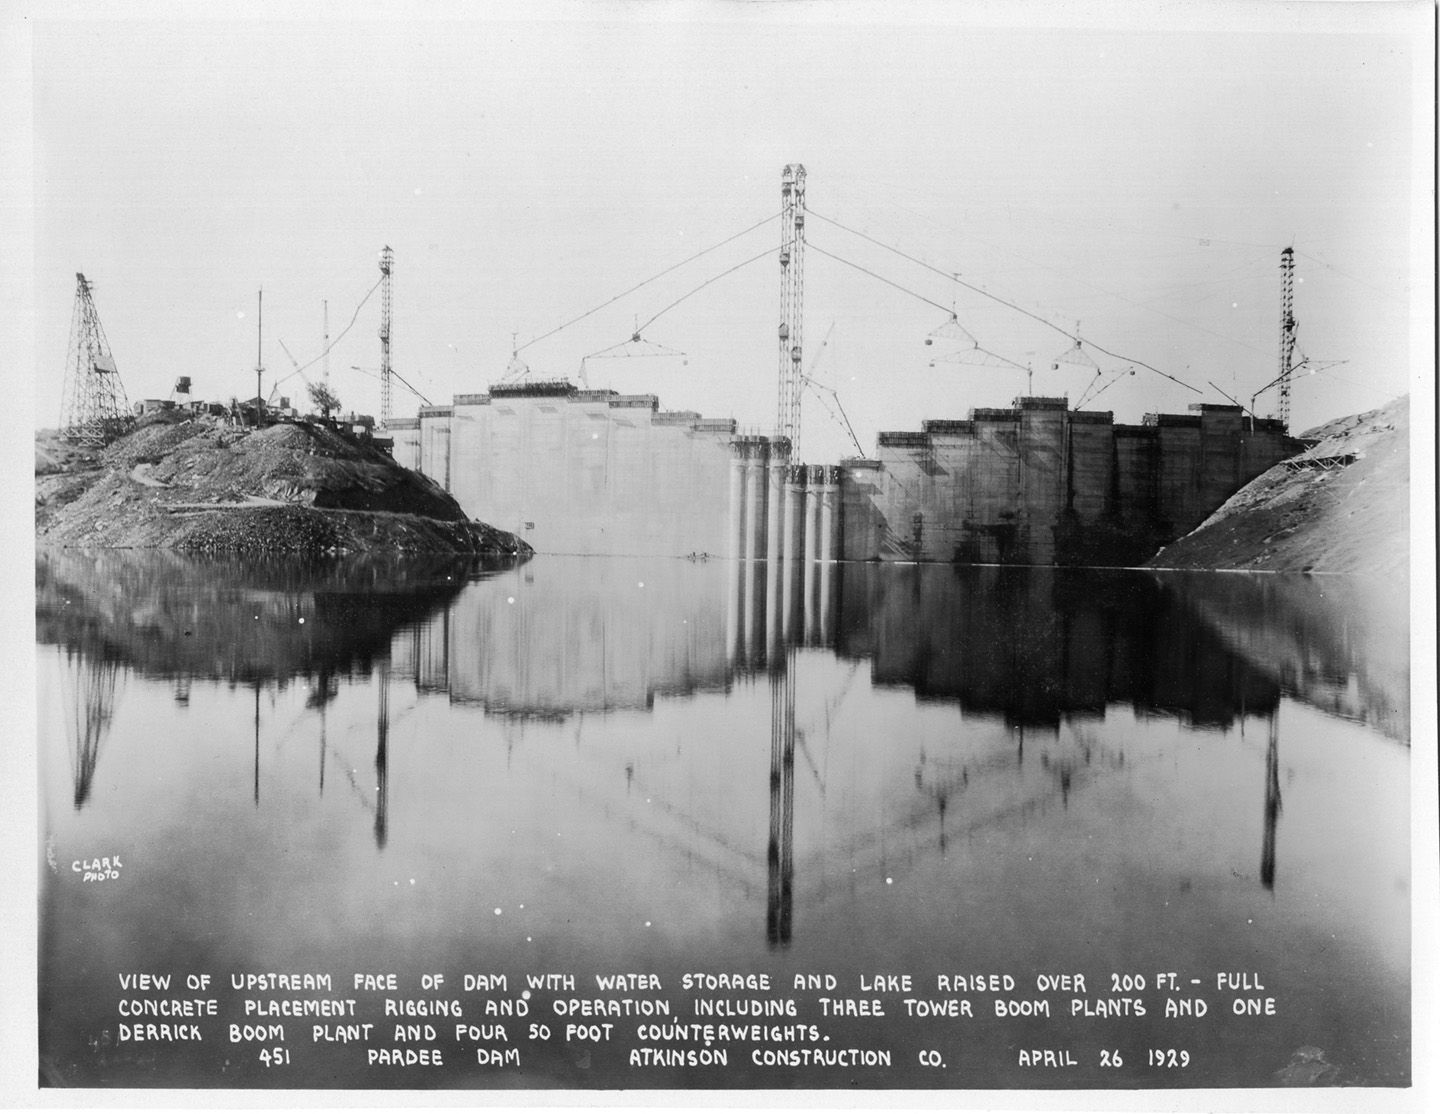 View of upstream face of dam with water storage and lake raised over 200 ft. - full concrete placement rigging and operation including three tower boom plants and one derrick boom plant and four 50 foot counterweights.(April 1929)	